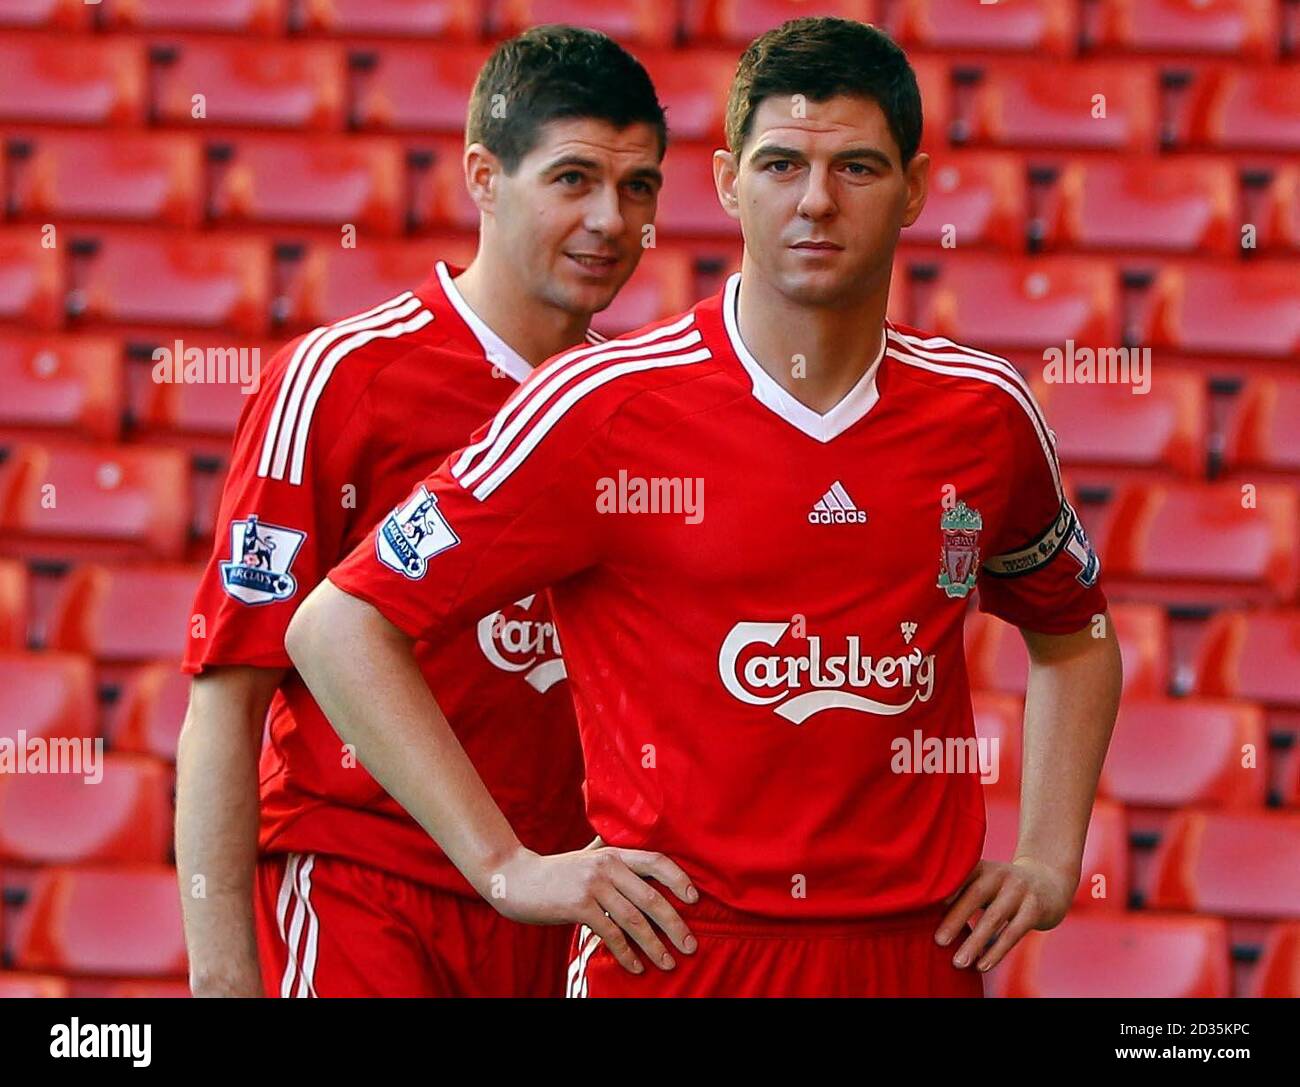 Liverpool captain Steven Gerrard with his waxwork double on the pitch at Anfield. The figure is the latest addition to the Madame Tussauds waxworks museum in London. Stock Photo